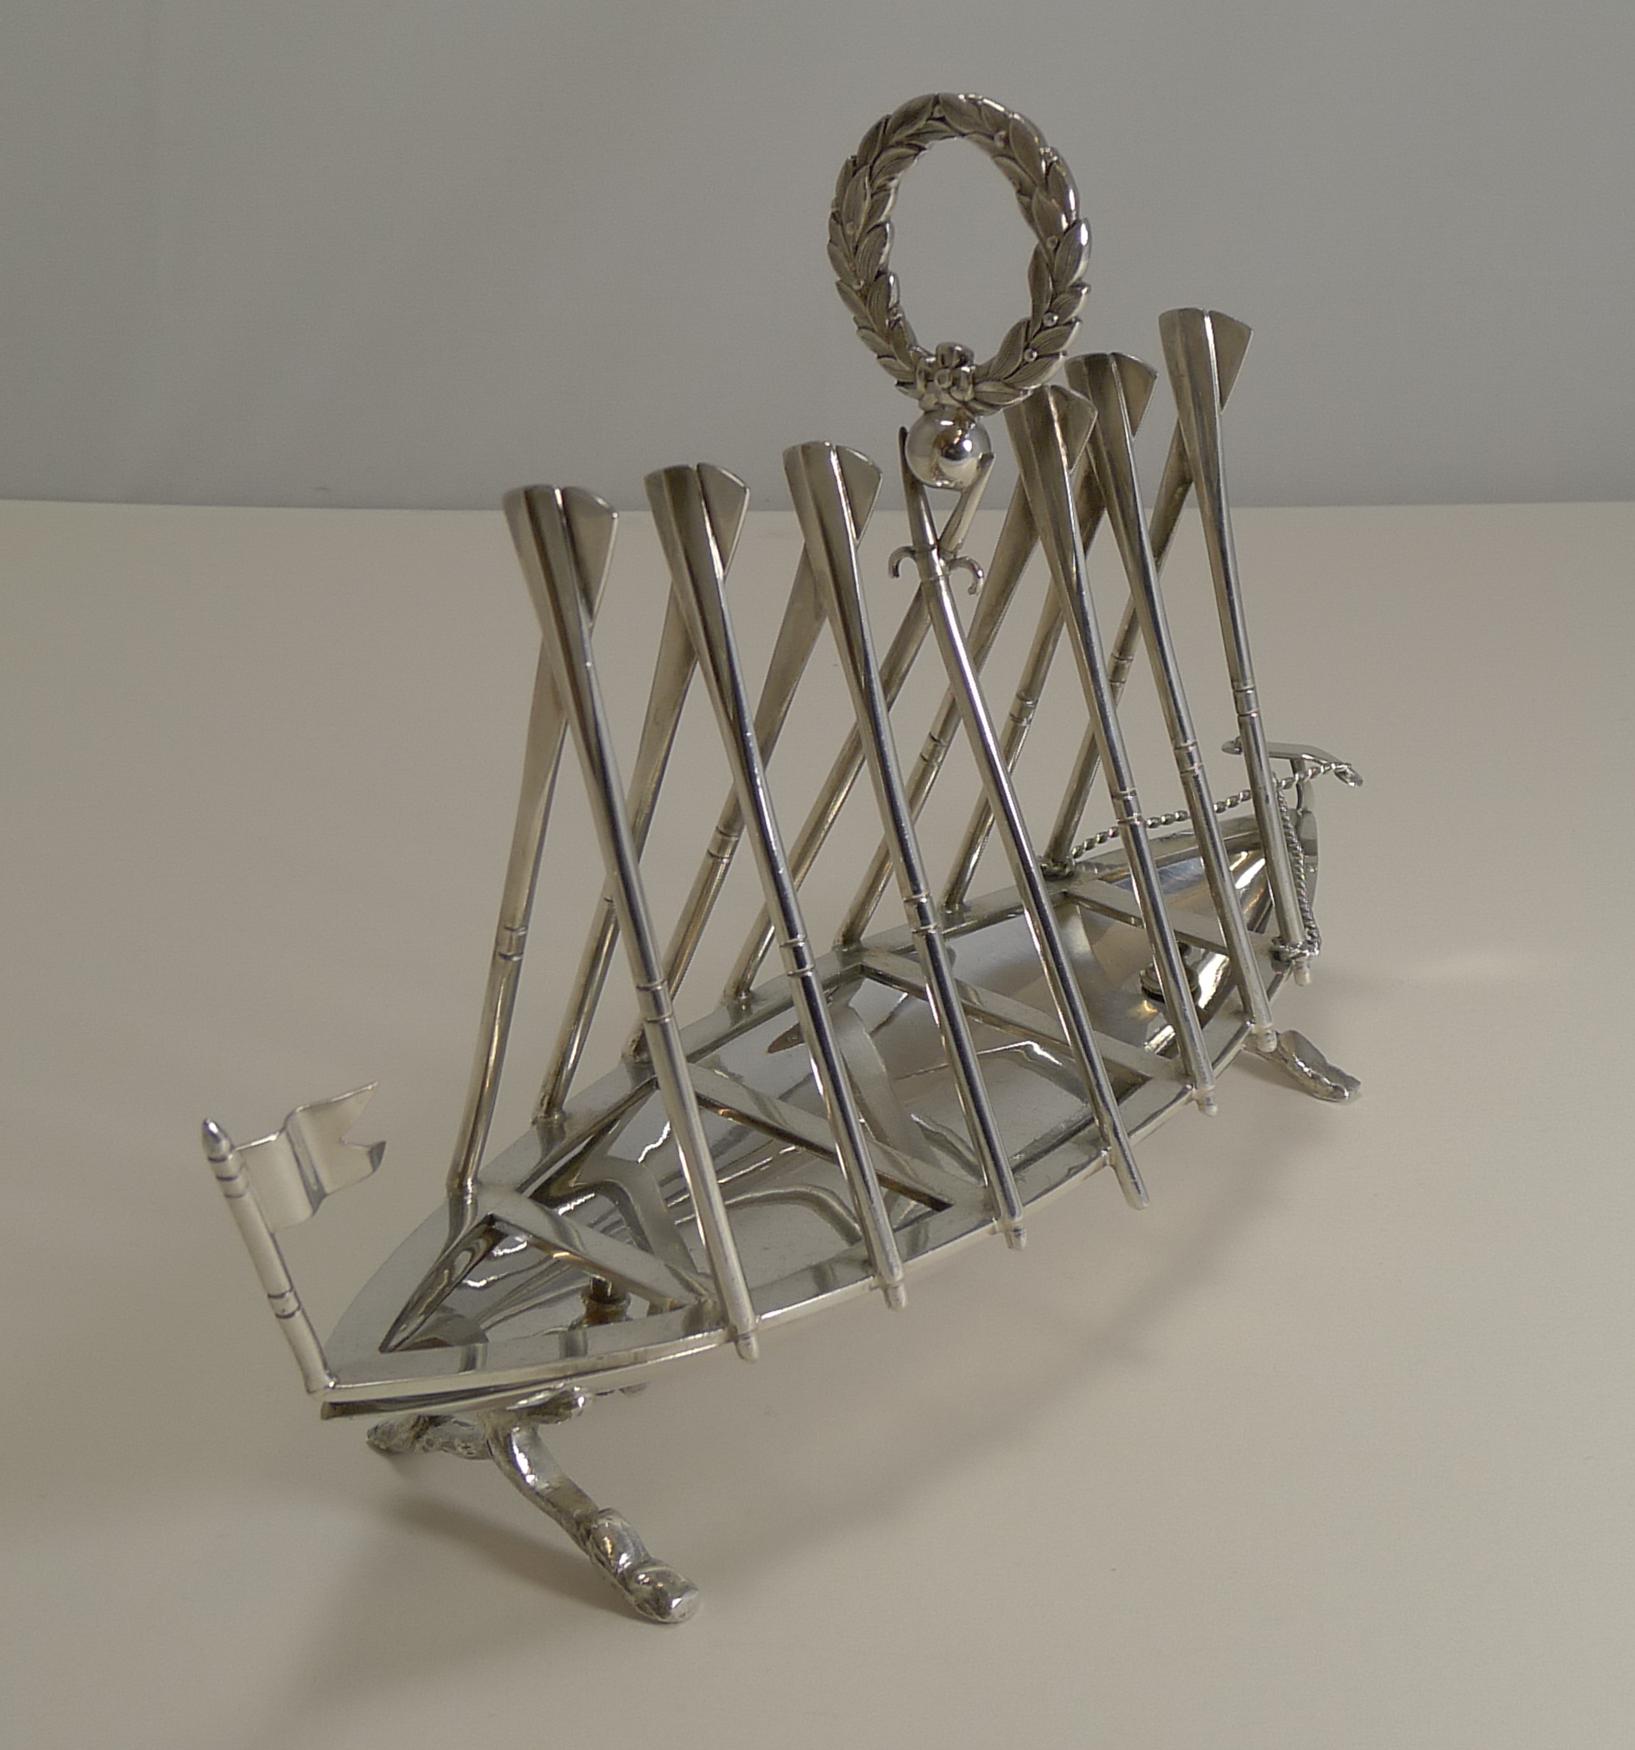 Late 19th Century Rare Antique Novelty Toast Rack, Rowing Gig by Benetfink, London, circa 1880